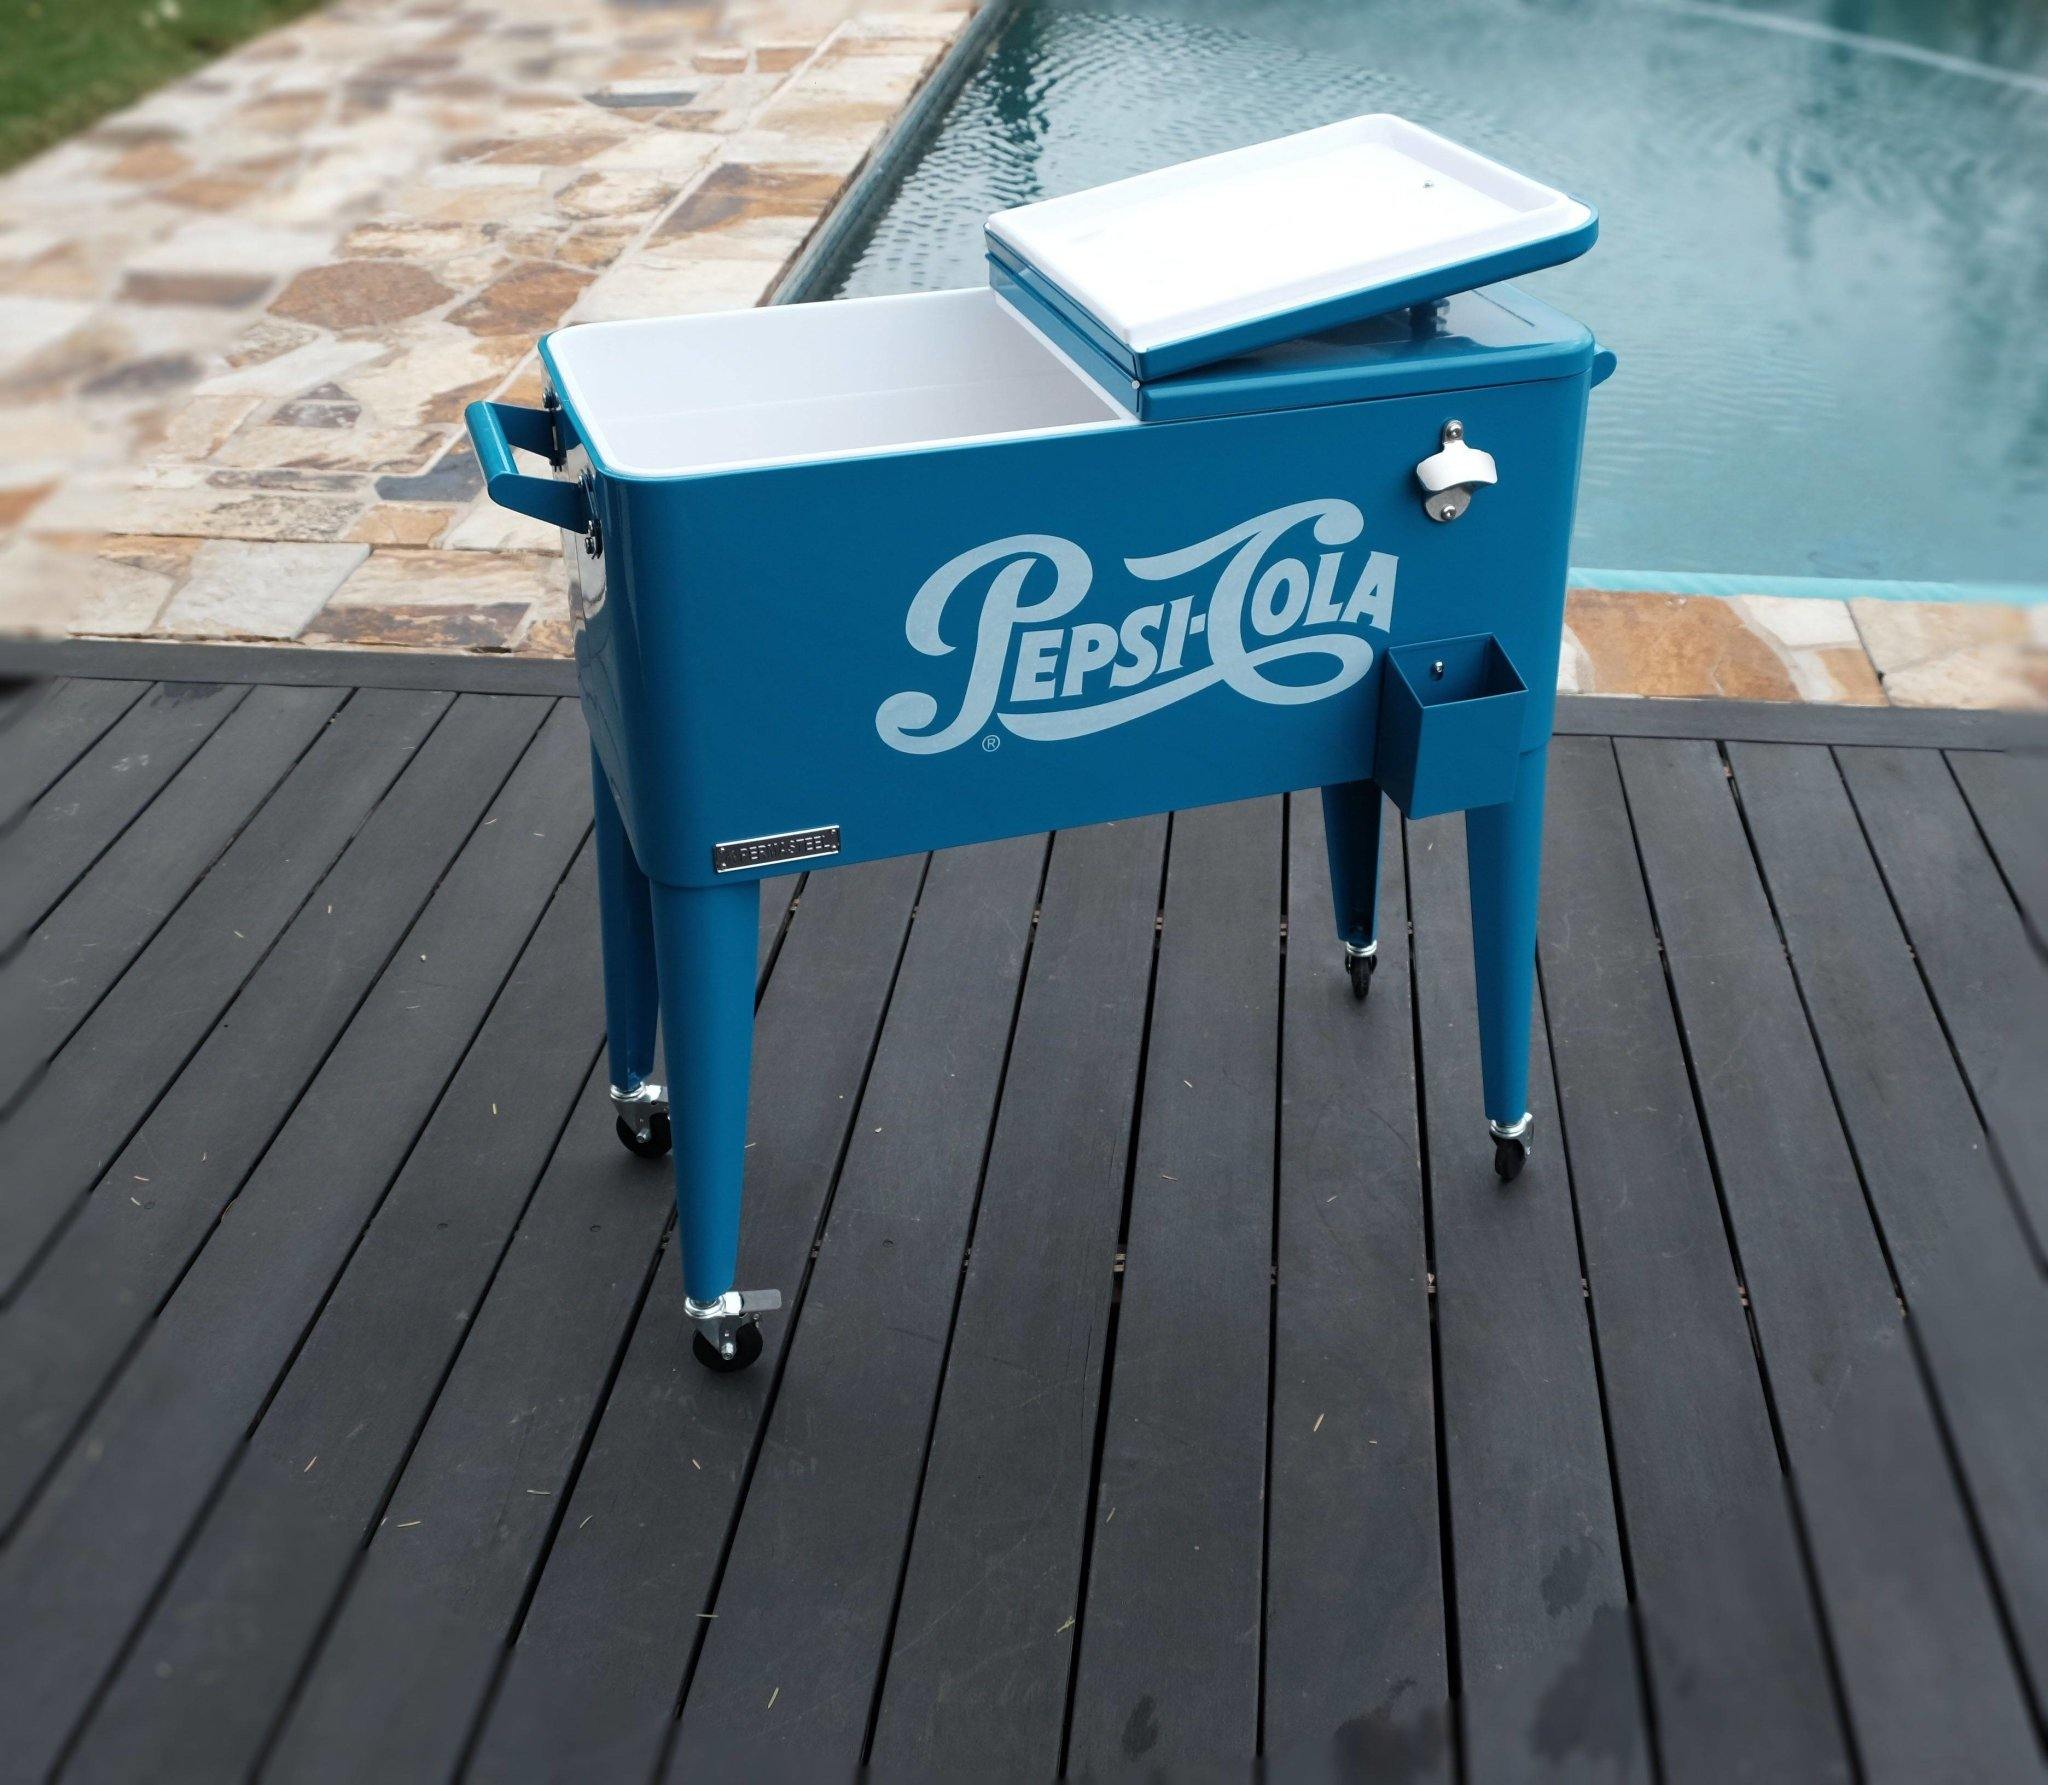 Patio Cooler Pepsi-Cola Styling - 80QT - Dti Direct USA